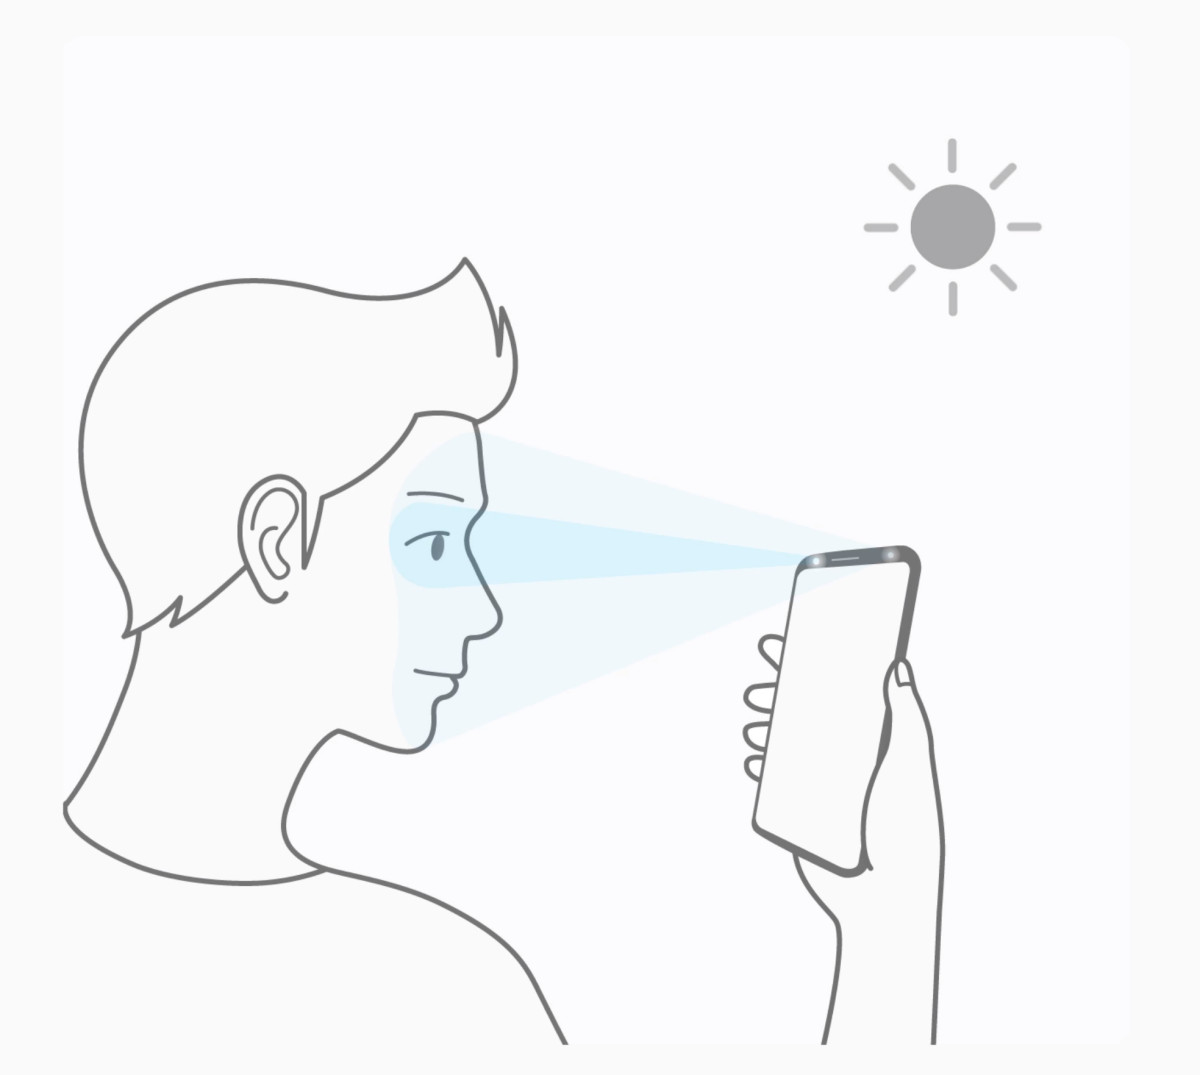 Samsung may take on Apple’s FaceID with new “Intelligent Scan” unlock feature